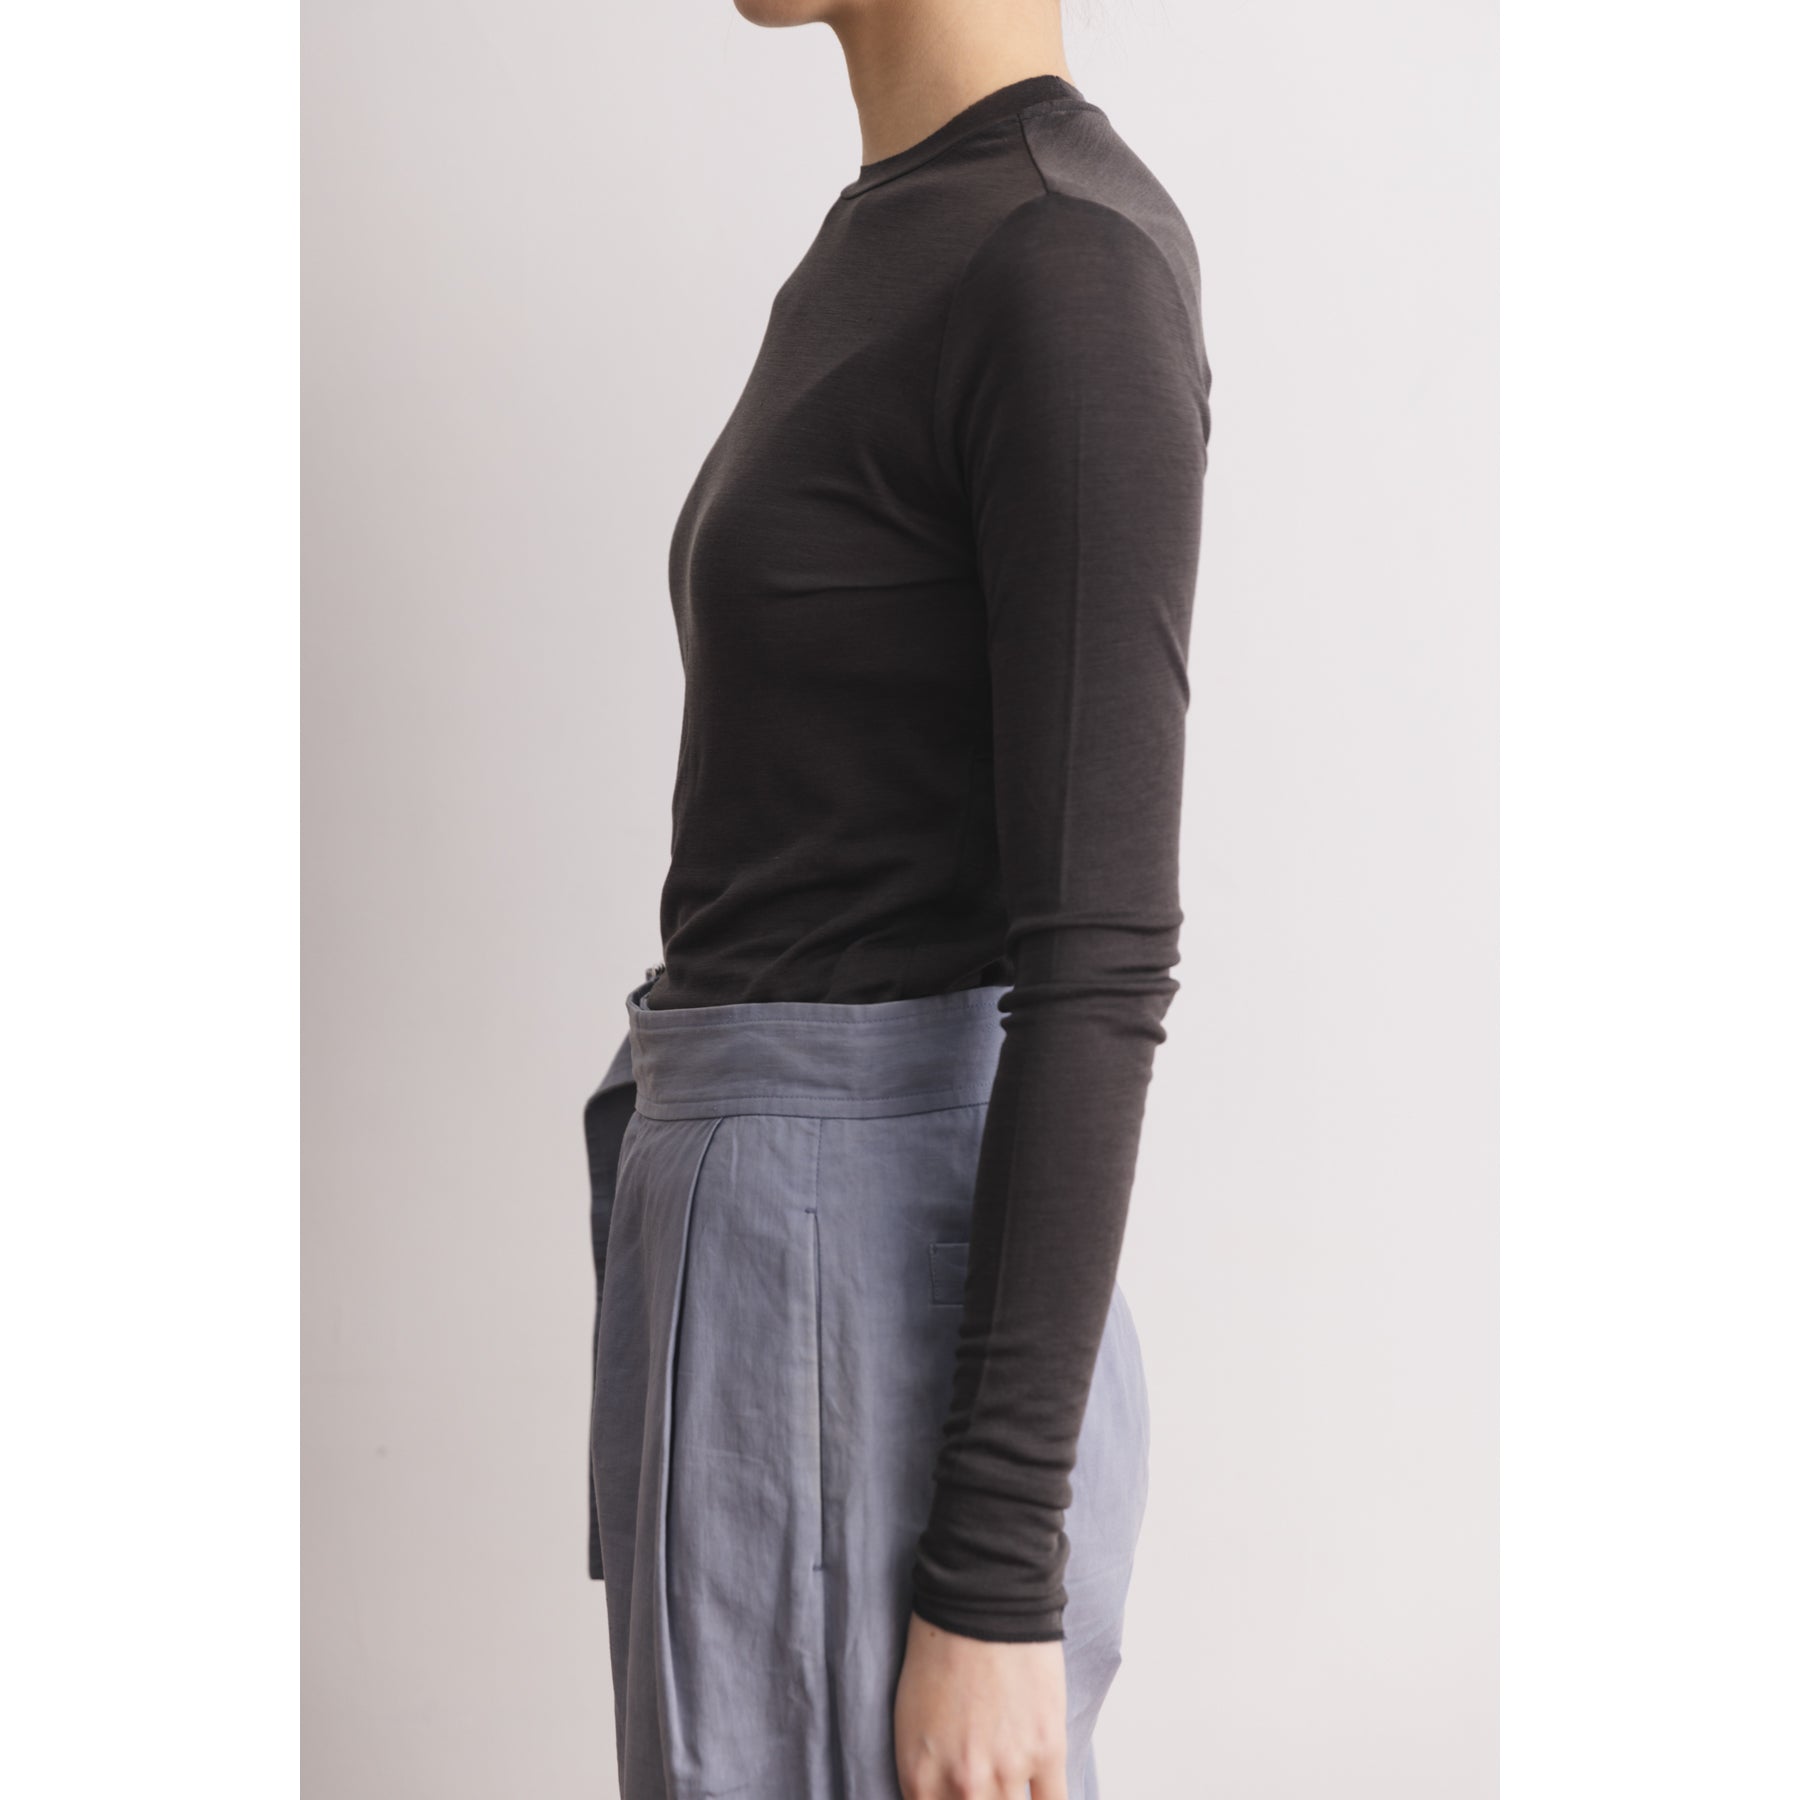 100% Silk Crew Neck Long Sleeve Top in Charcoal